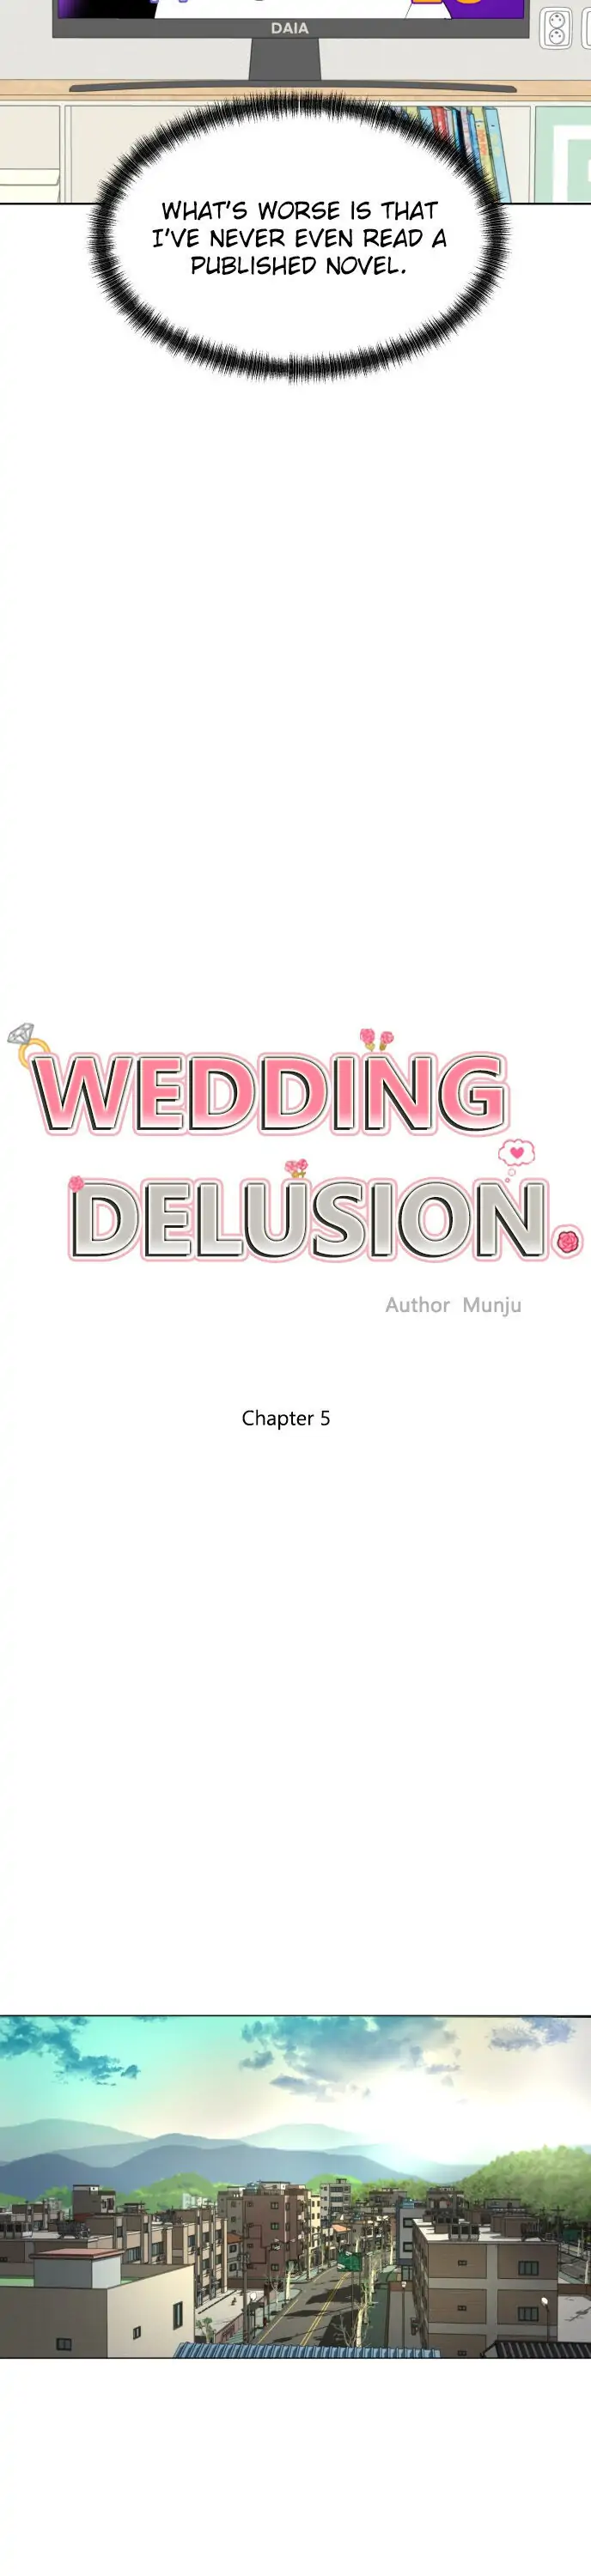 Wedding Delusion chapter 5